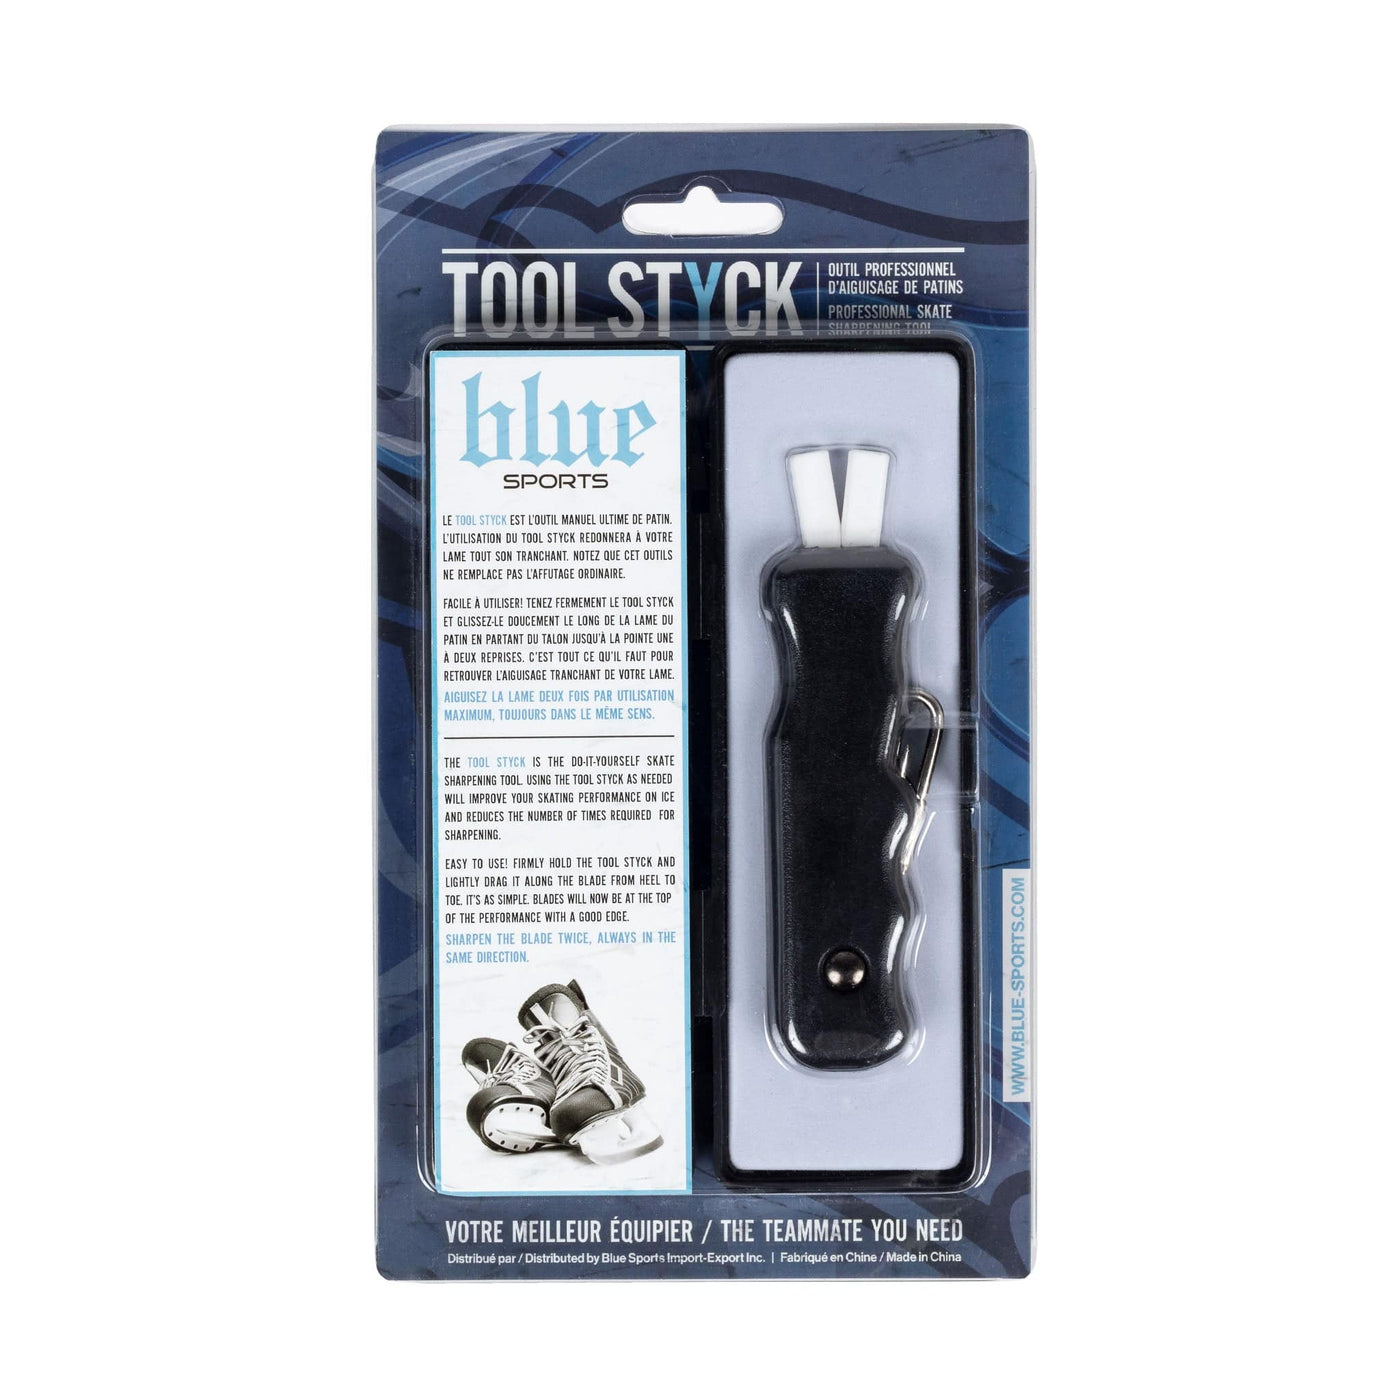 Blue Sports Tool Styck Sharpener with Hook and Screwdriver